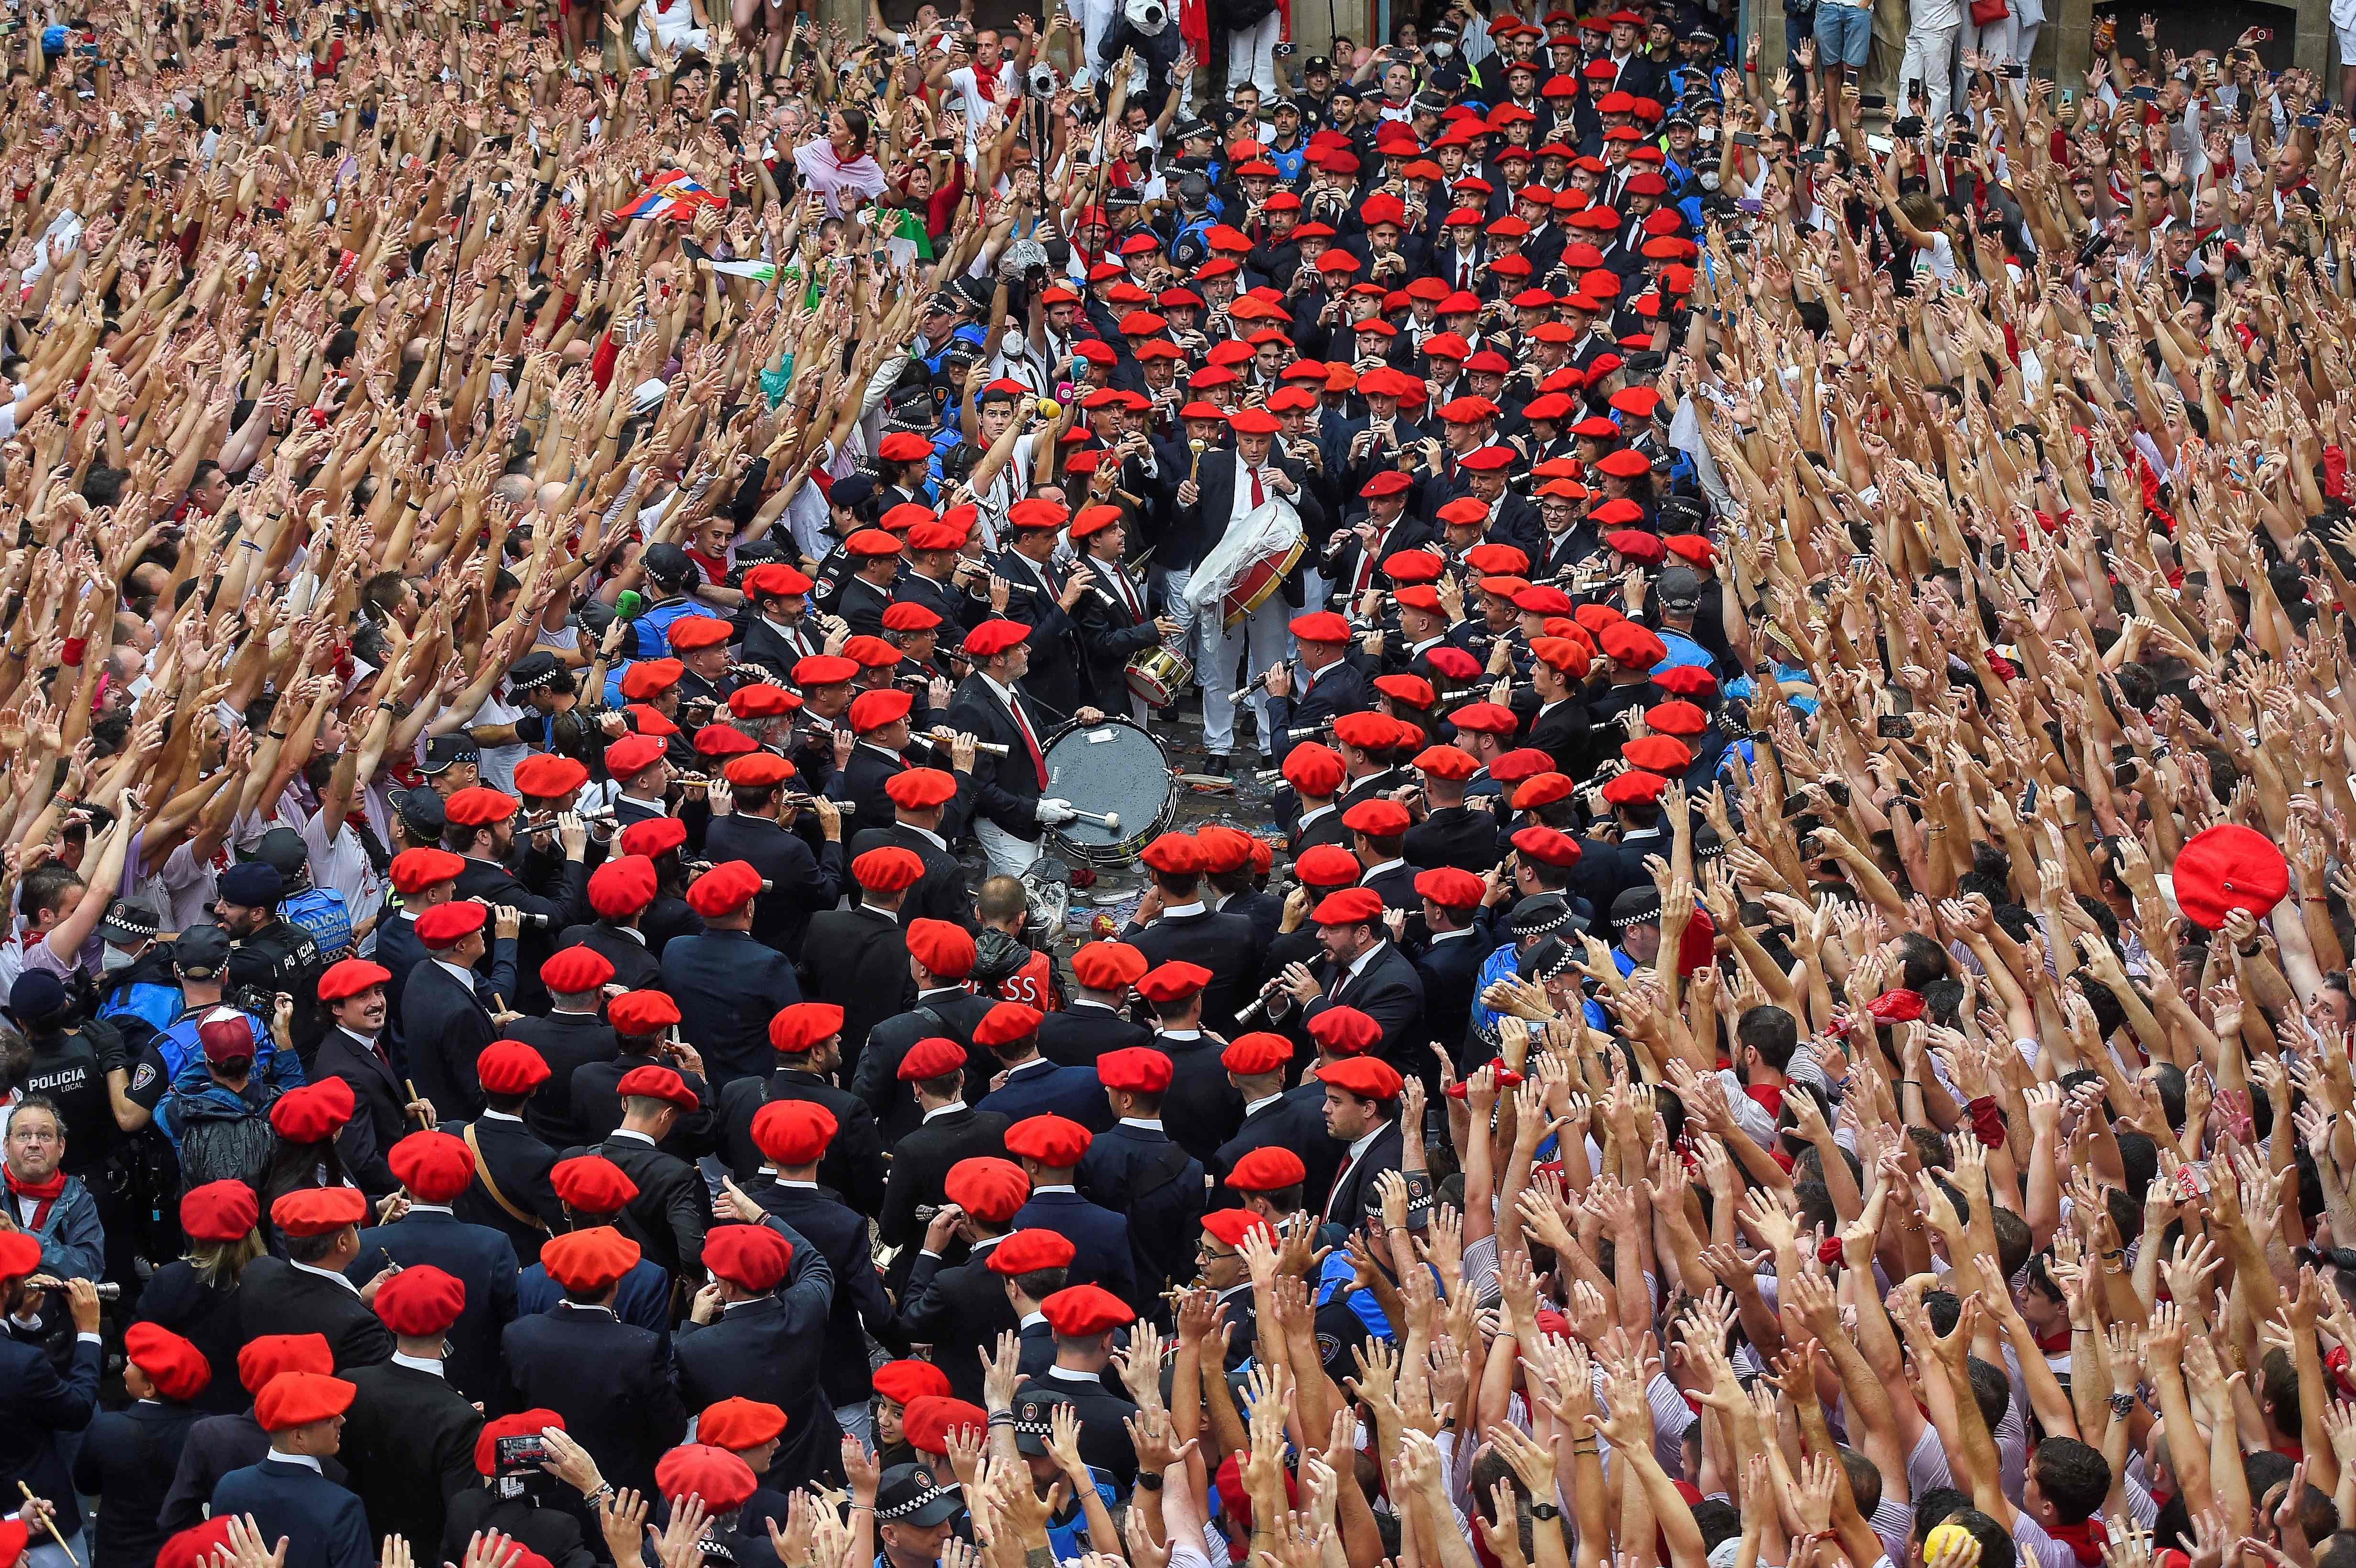 Participants celebrate as the "Pamplonesa" municipal music band performs during the "Chupinazo" (start rocket) opening ceremony to mark the kick-off of the San Fermin Festival outside the Town Hall of Pamplona in northern Spain. Credit: AFP Photo